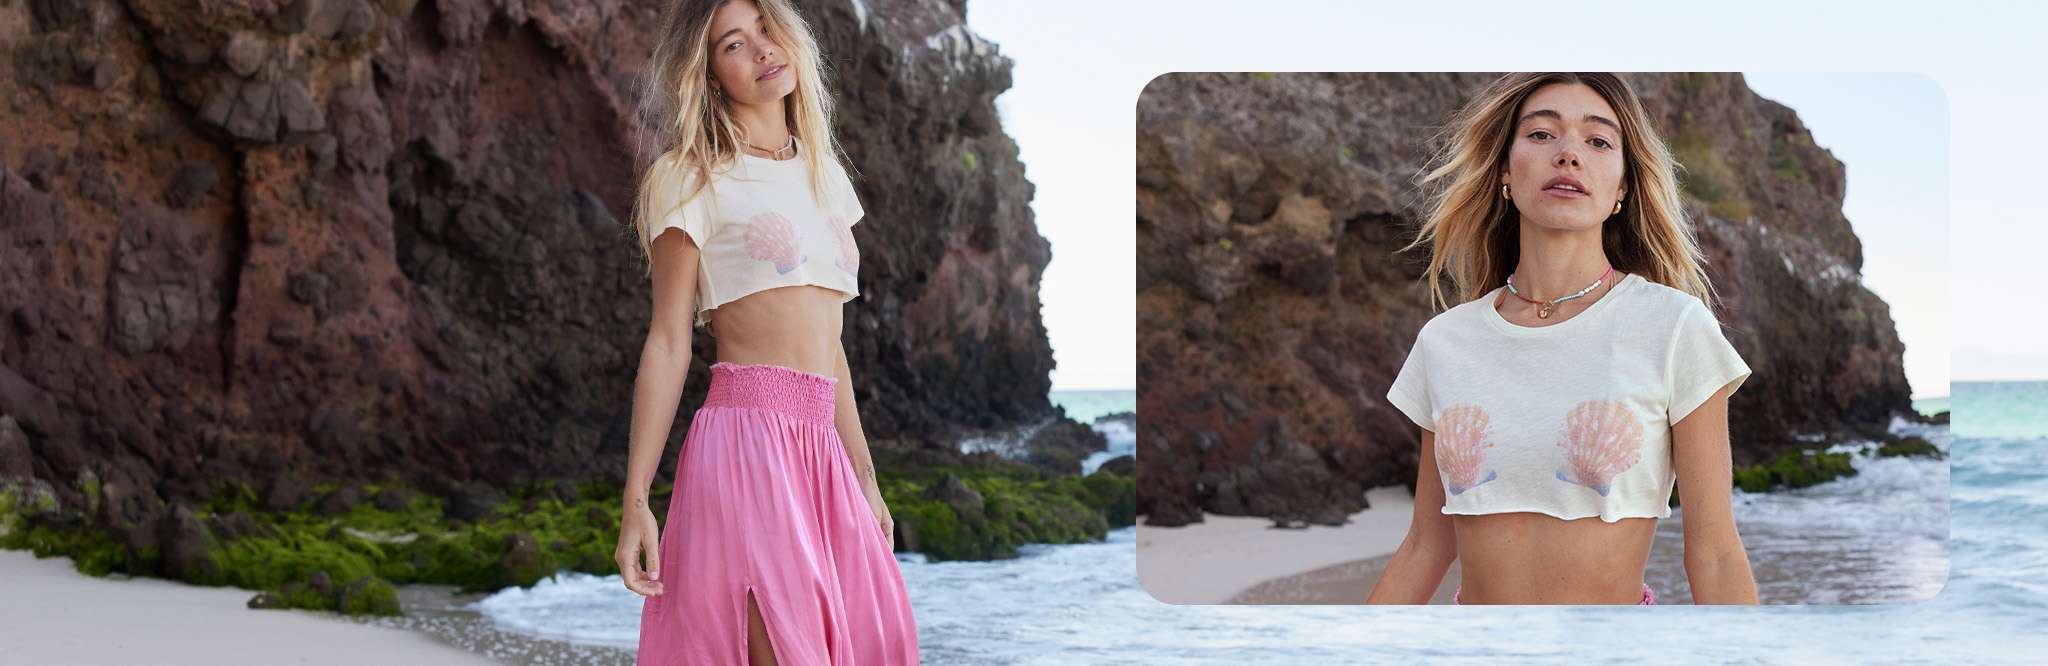 model in white cropped top and pink skirt on the beach